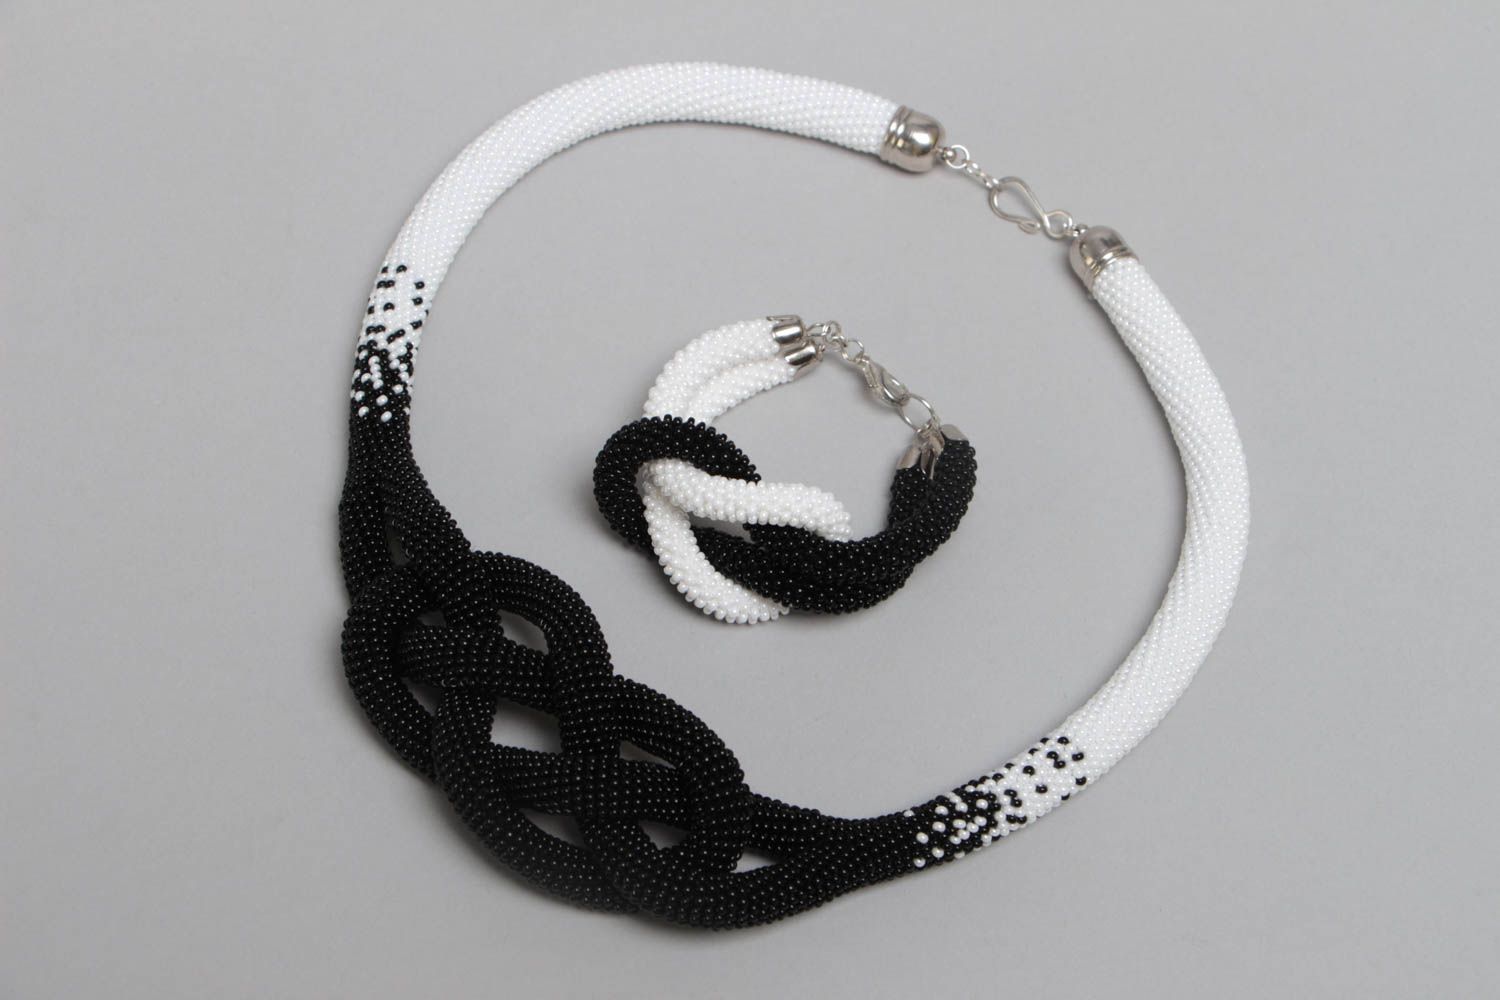 Beaded jewelry necklace and bracelet in shape of cords black and white beautiful photo 2